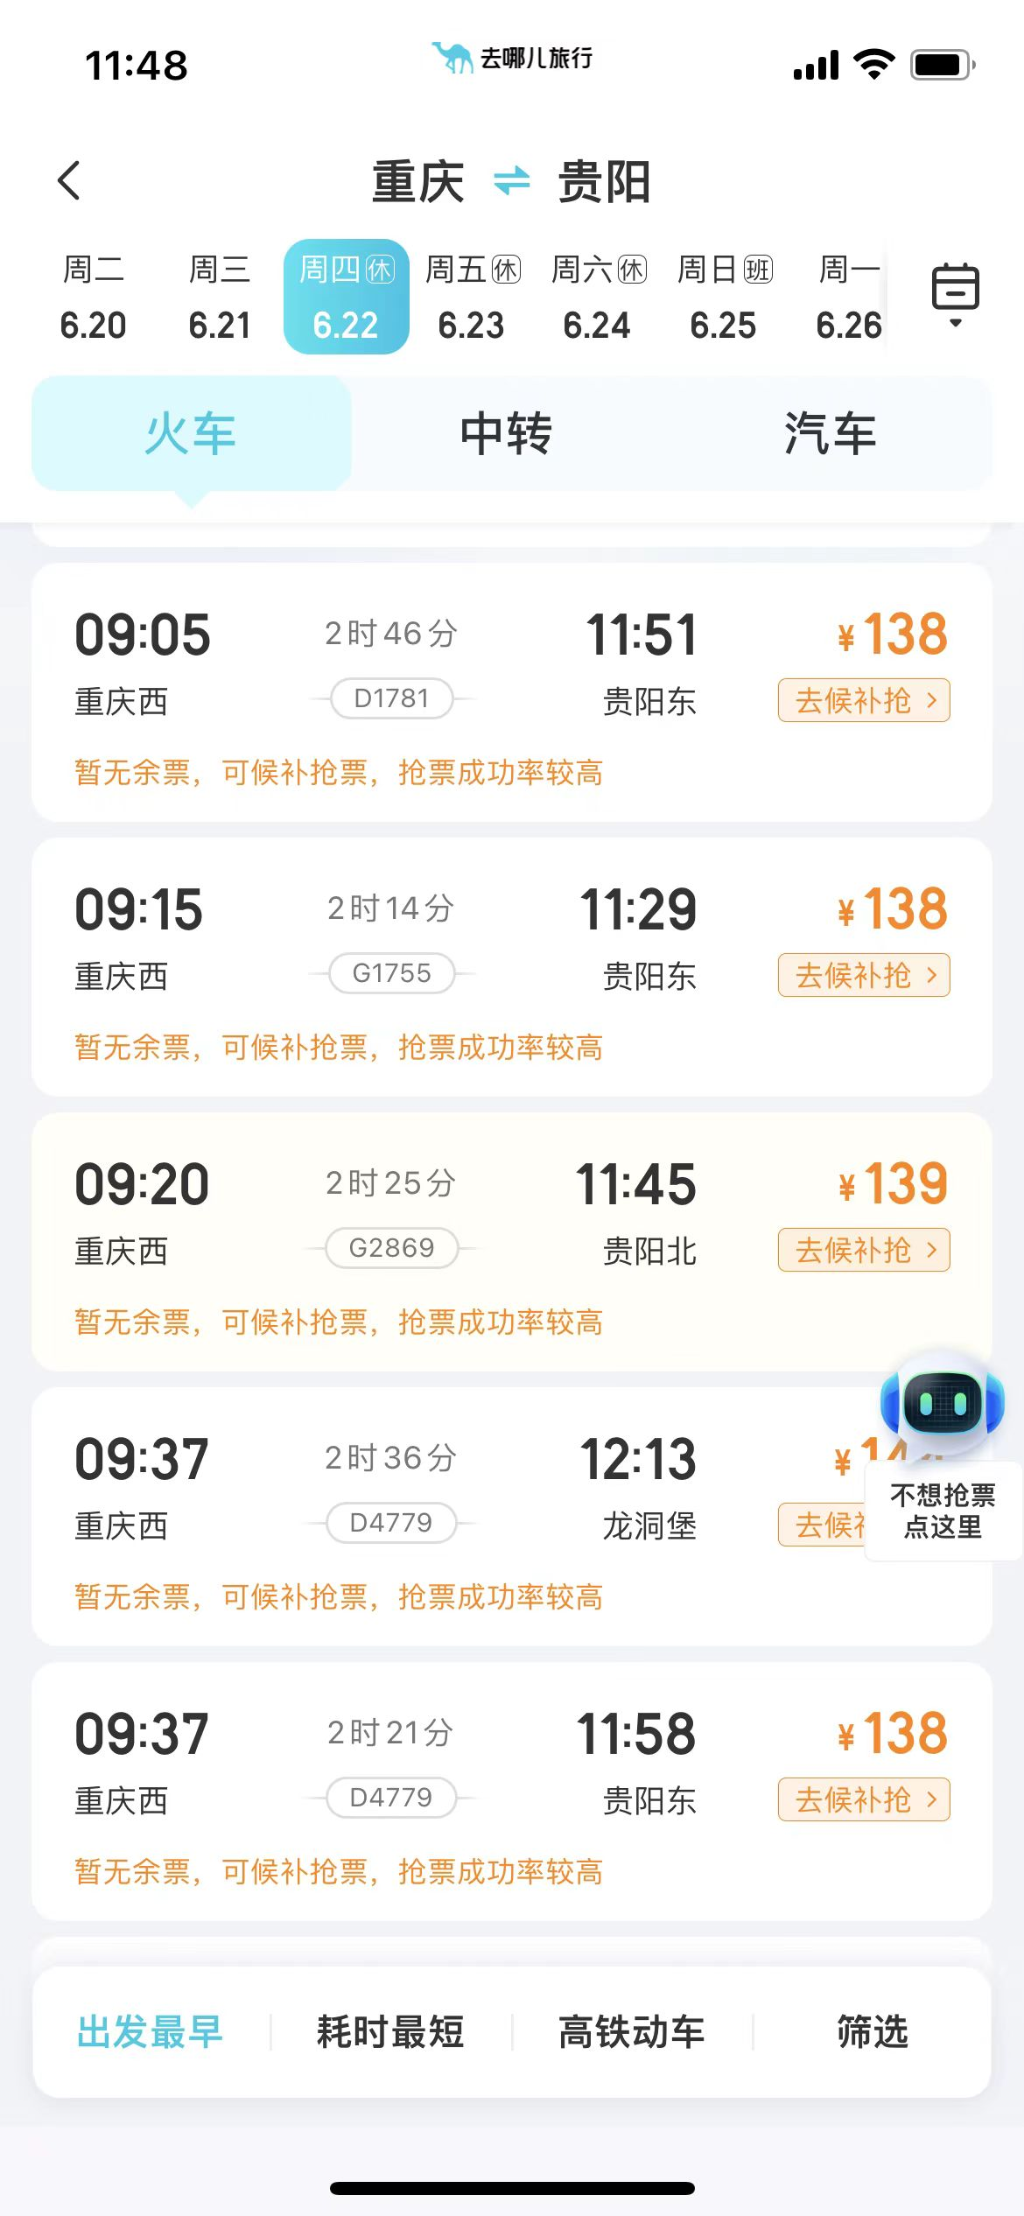 Tickets for multiple train numbers of lines like Chongqing – Guiyang, Chongqing – Xi'an, etc. sold out. (Photo provided by Qunar)